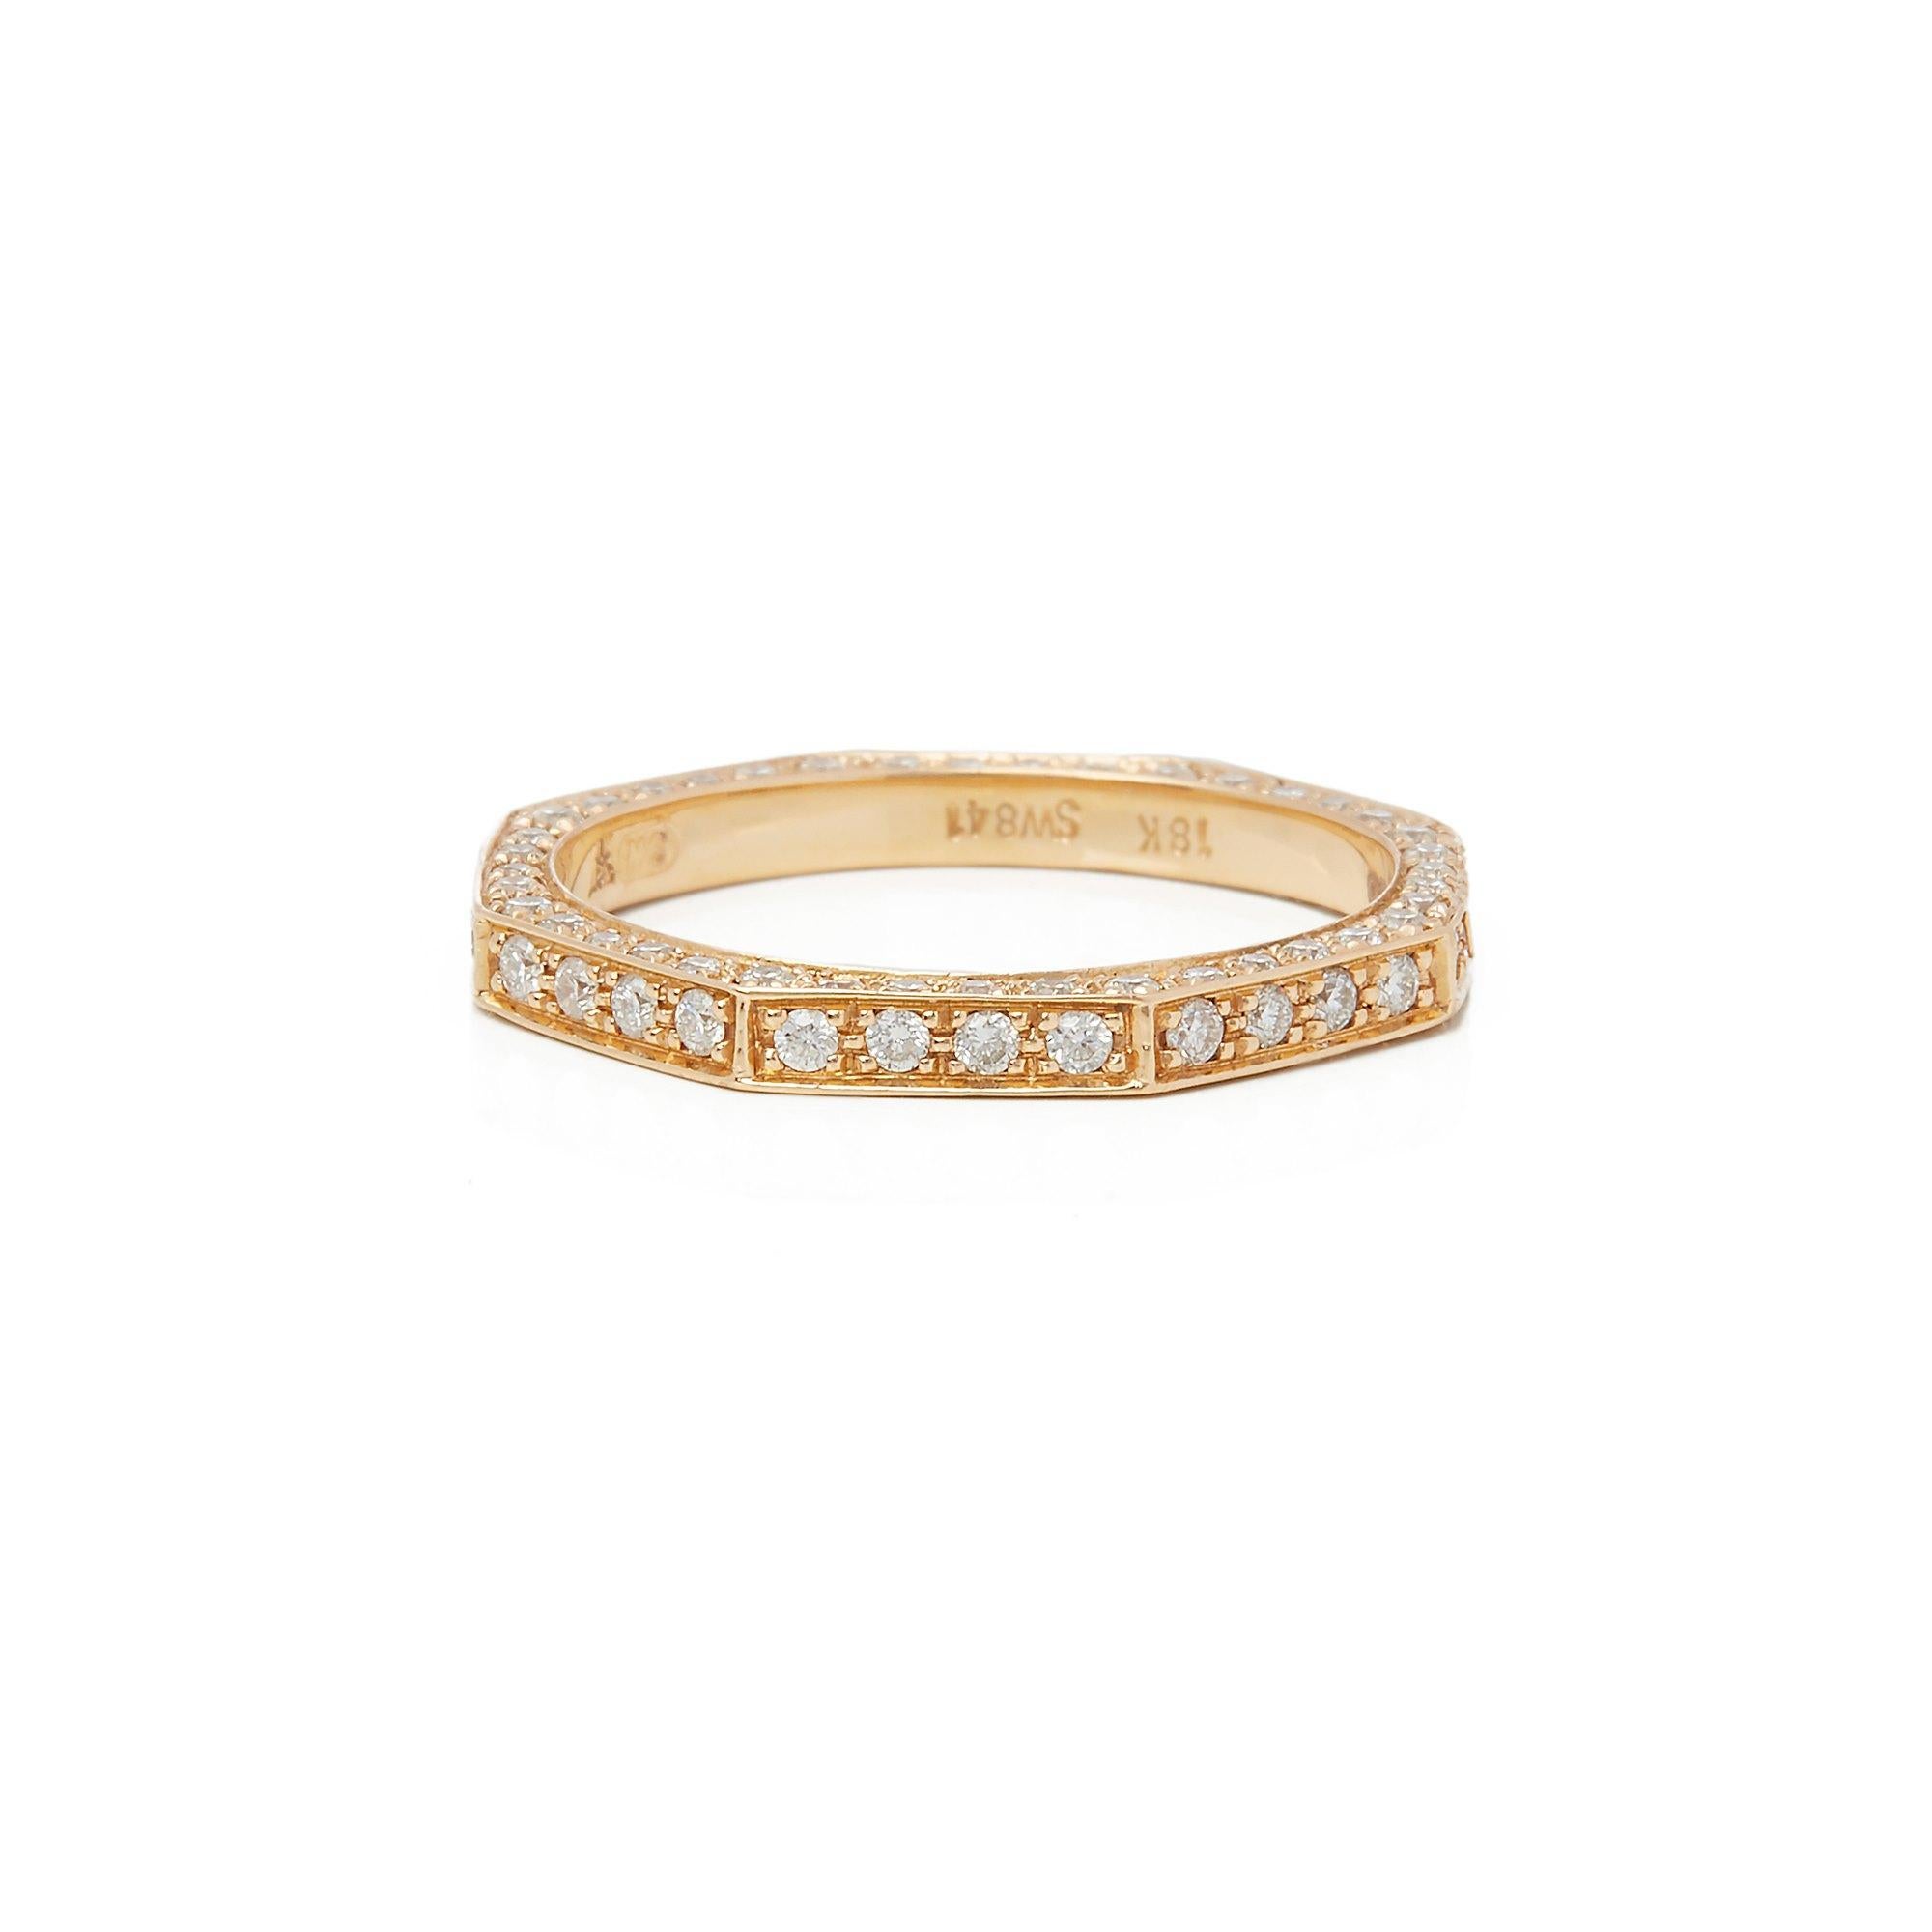 This Ring by Stephen Webster is from his Deco Collection and features One Hundred and Twelve Round Brilliant Diamonds Totalling 1.12cts in an Octagonal Design. Set in 18k Rose Gold. Ring Size UK N, EU Size 54, USA Size 7. Complete with Xupes